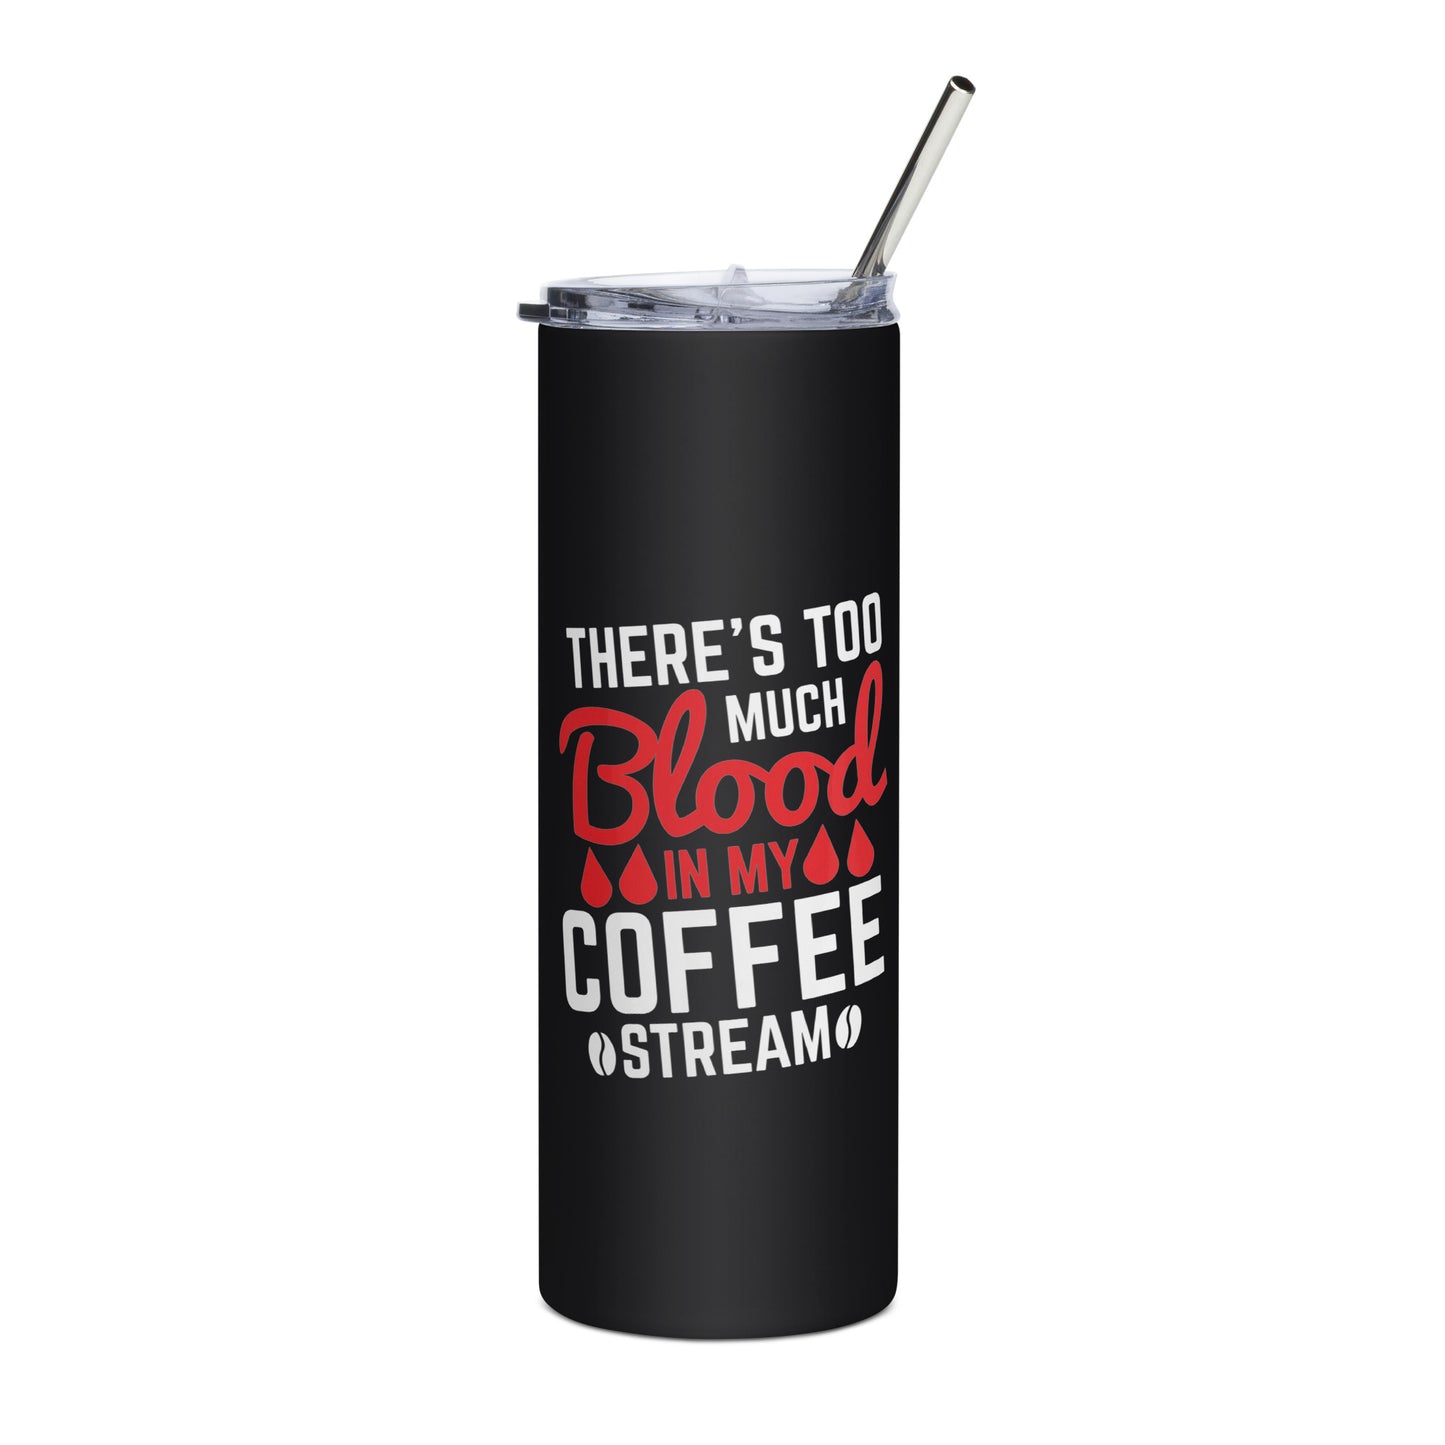 There's Too Much Blood in my Coffee Stream Stainless steel tumbler